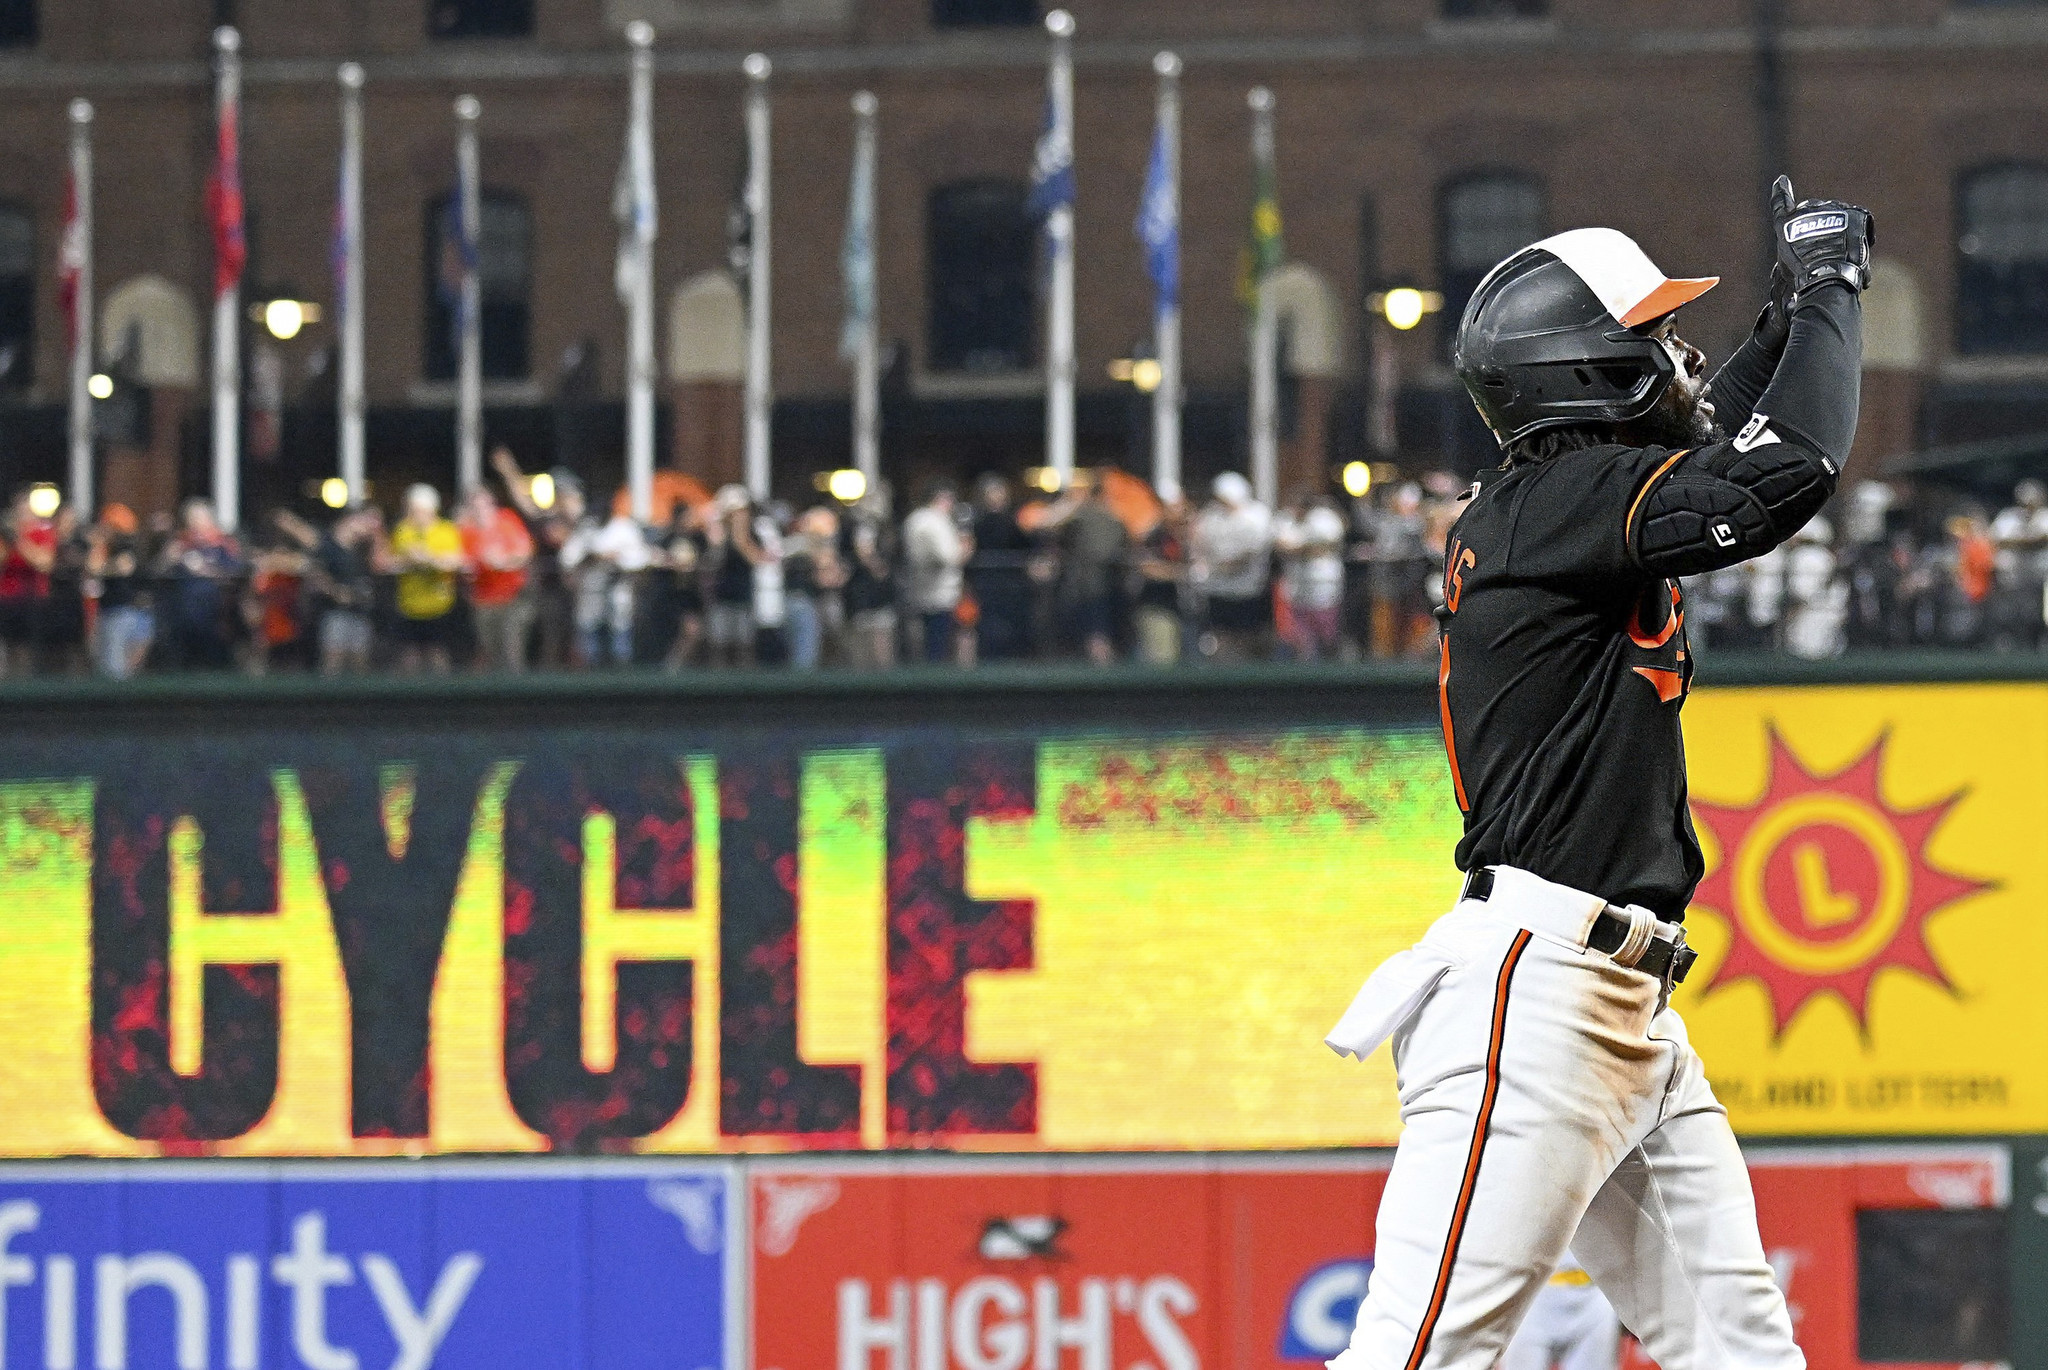 Orioles outfielder Cedric Mullins hits for the cycle against Pirates